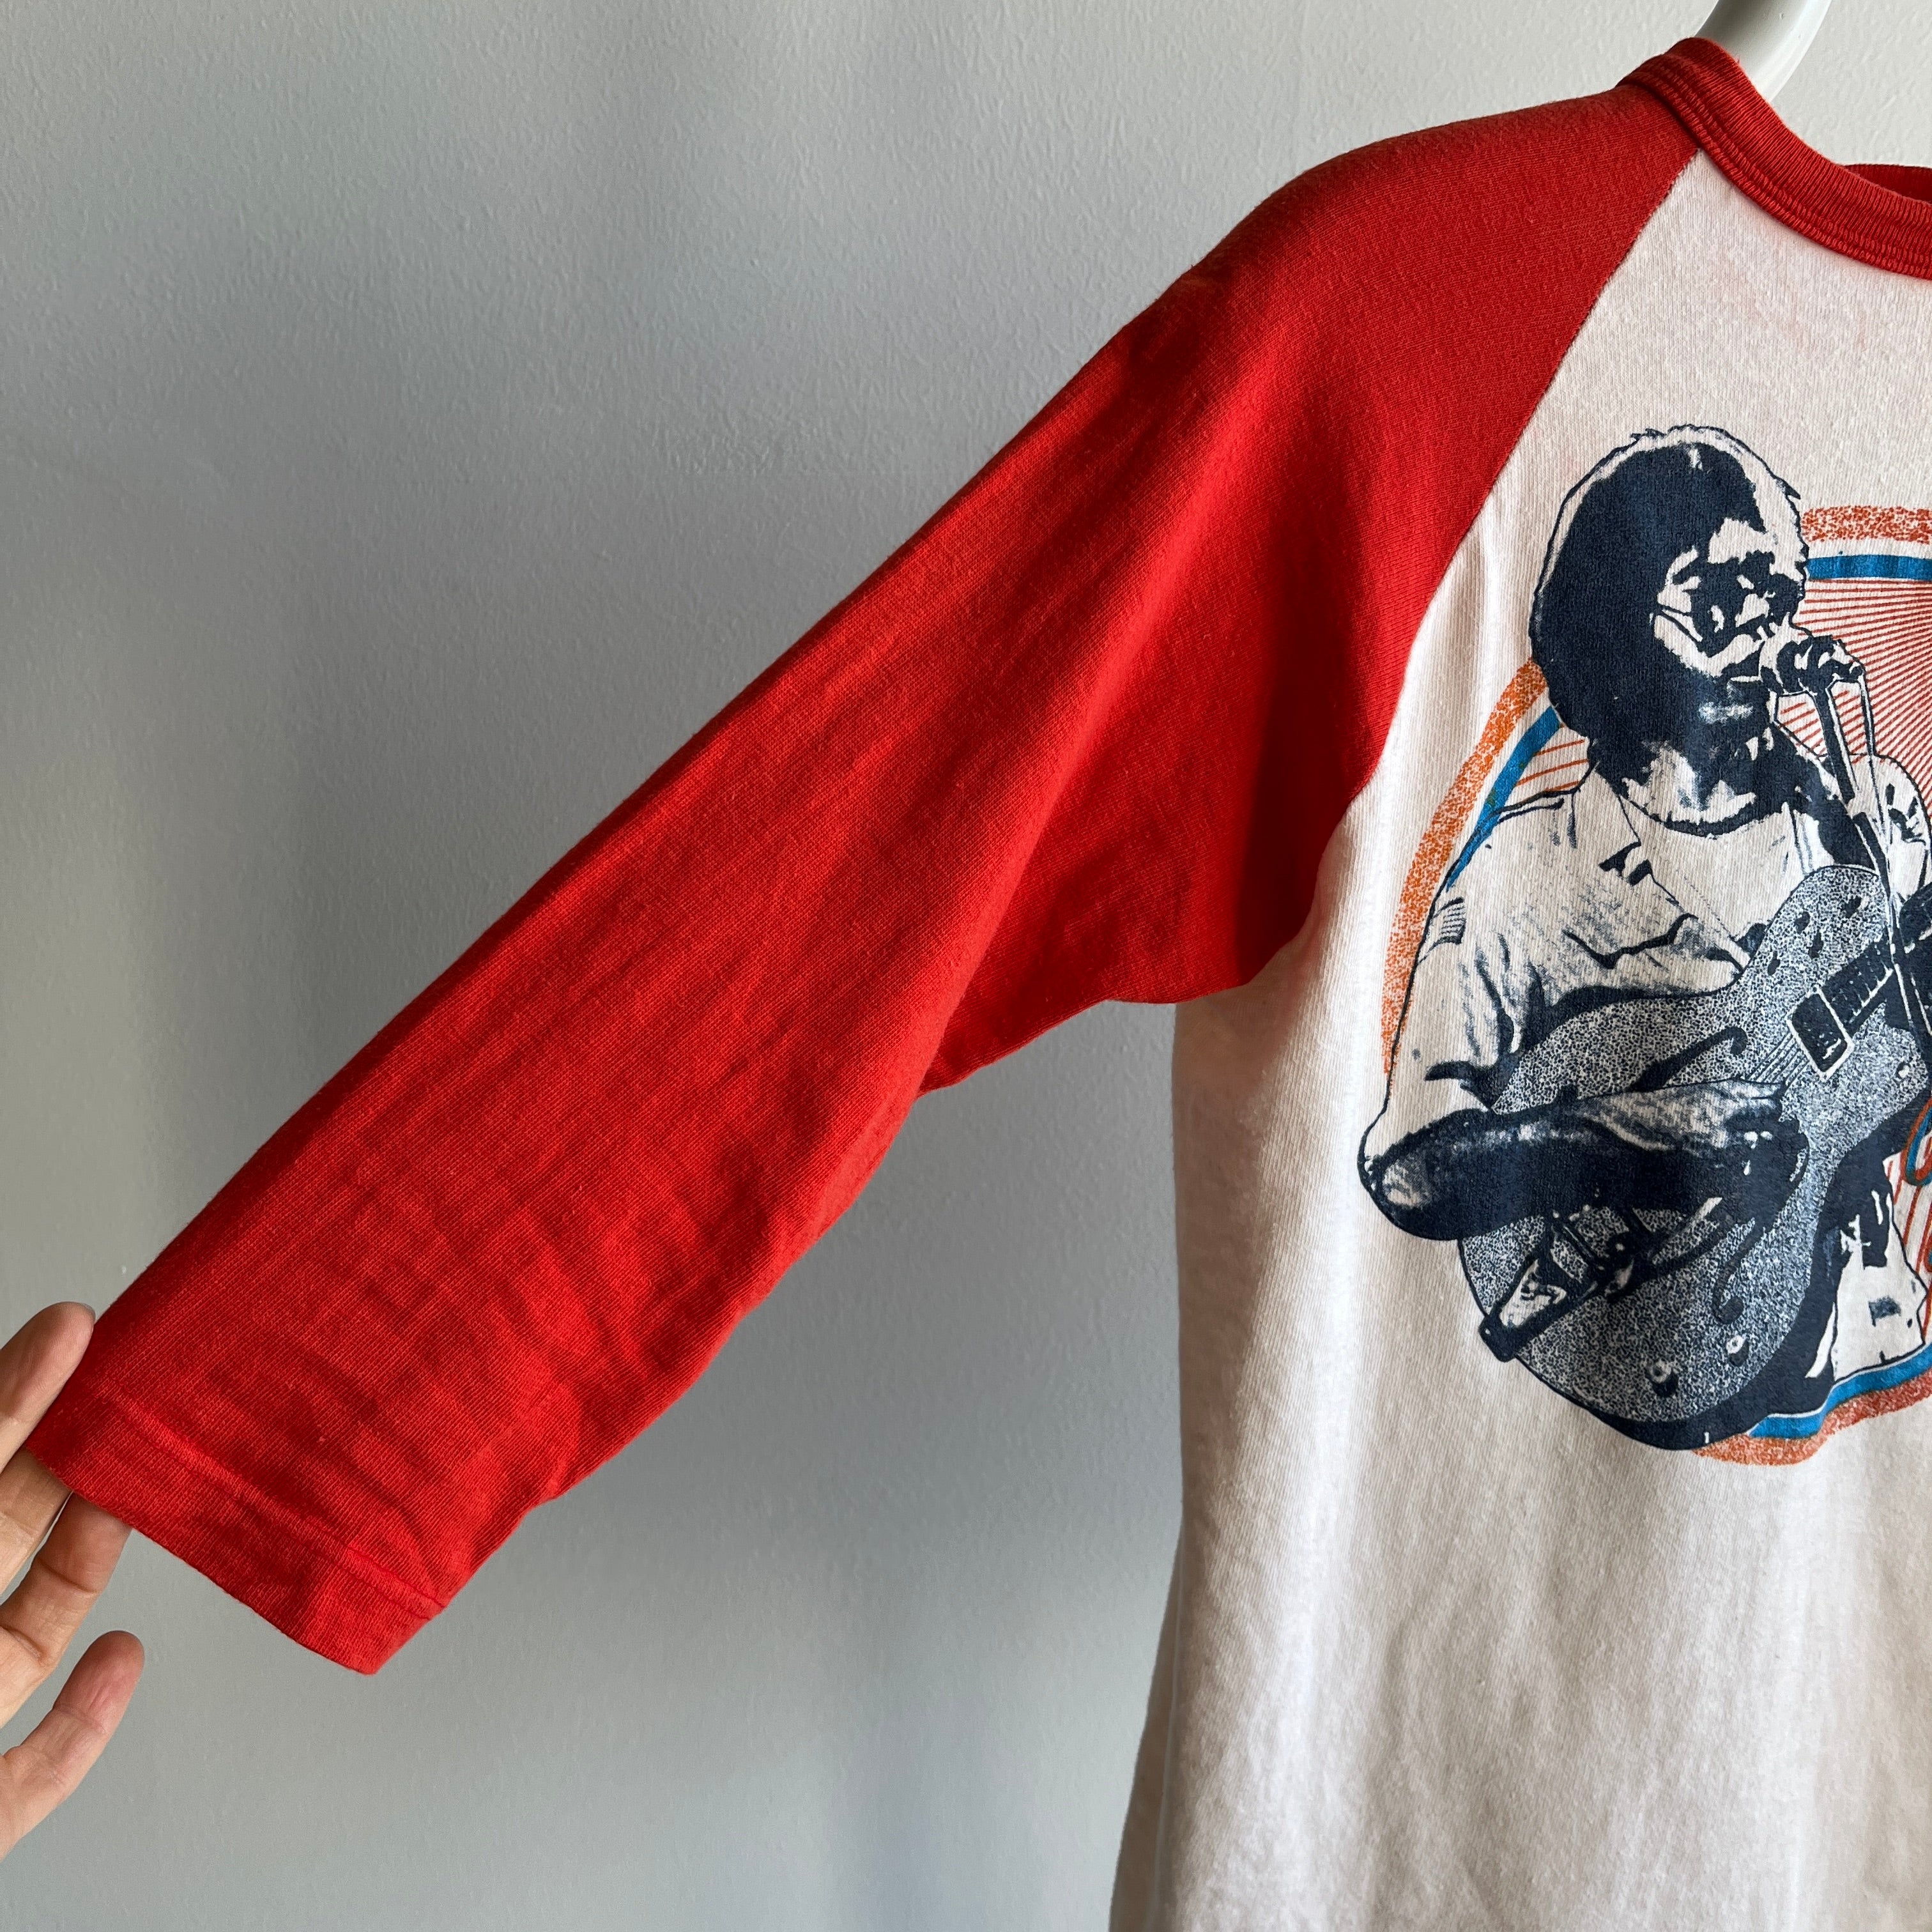 1978 Neil Young Crazy Horse Tour Cotton Baseball T-Shirt - For Collector/Super Fan Only